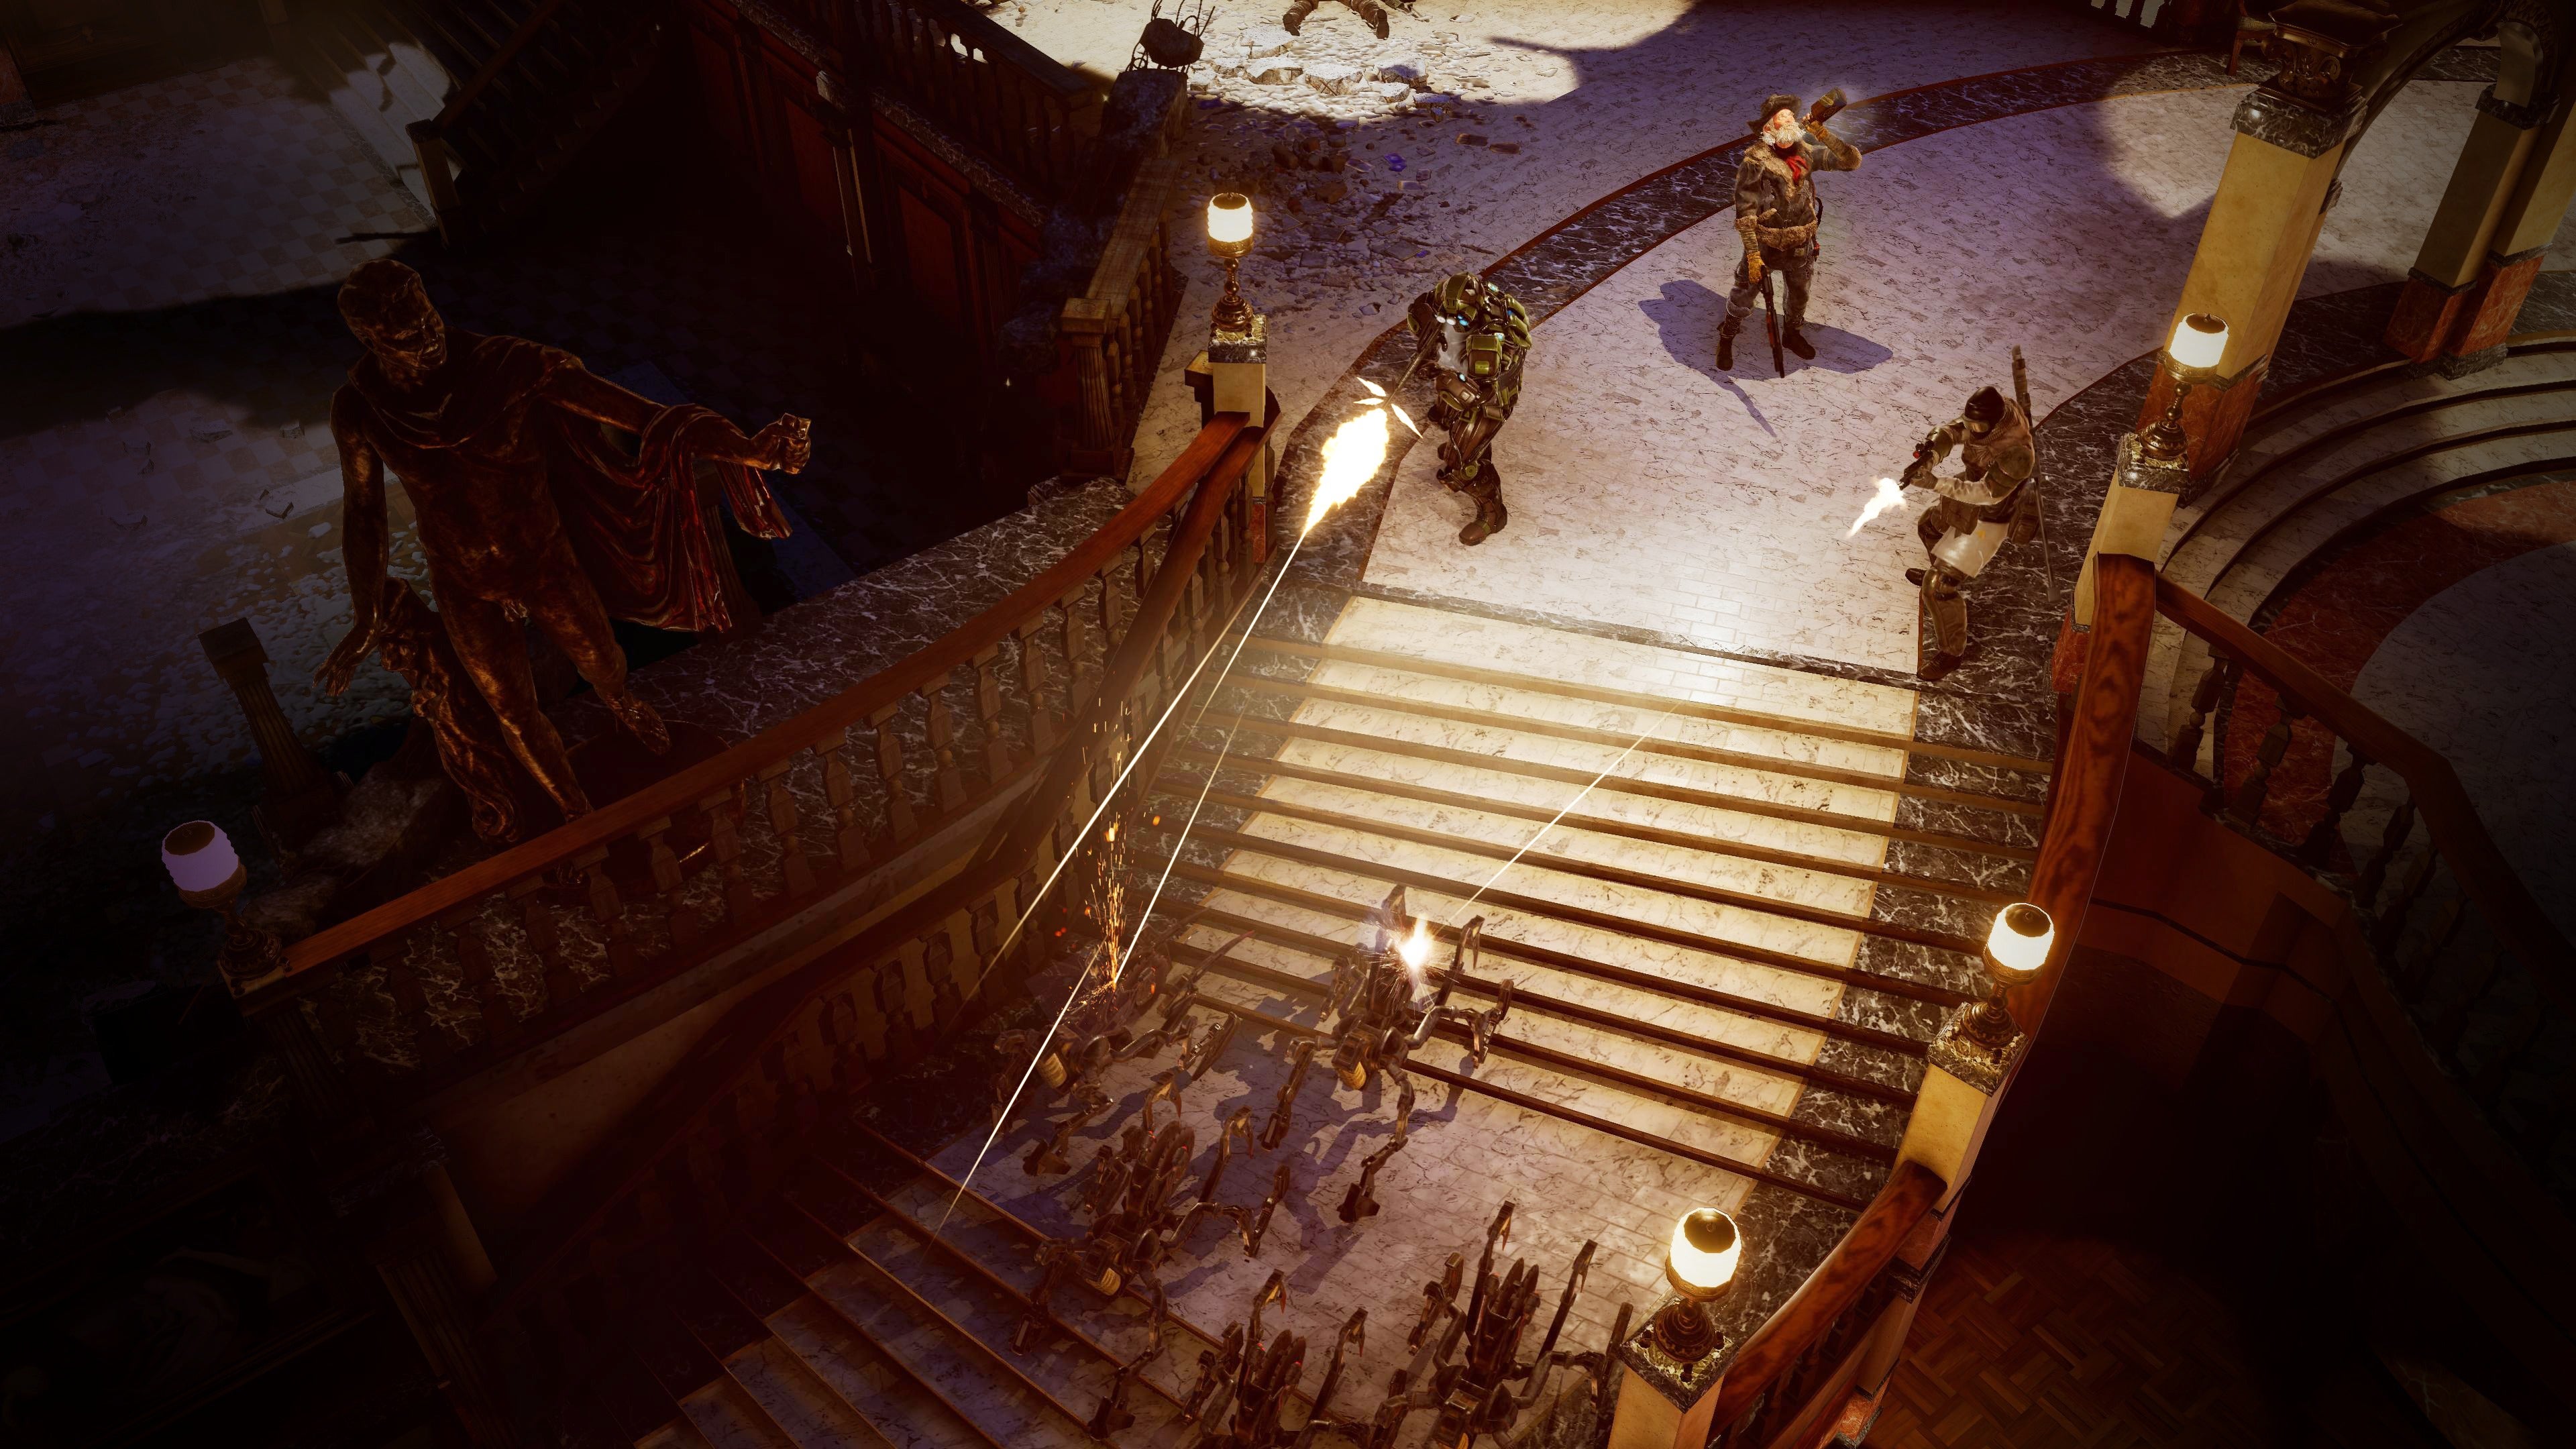 Hands-on with Wasteland 3: A simplified but still satisfying glimpse of